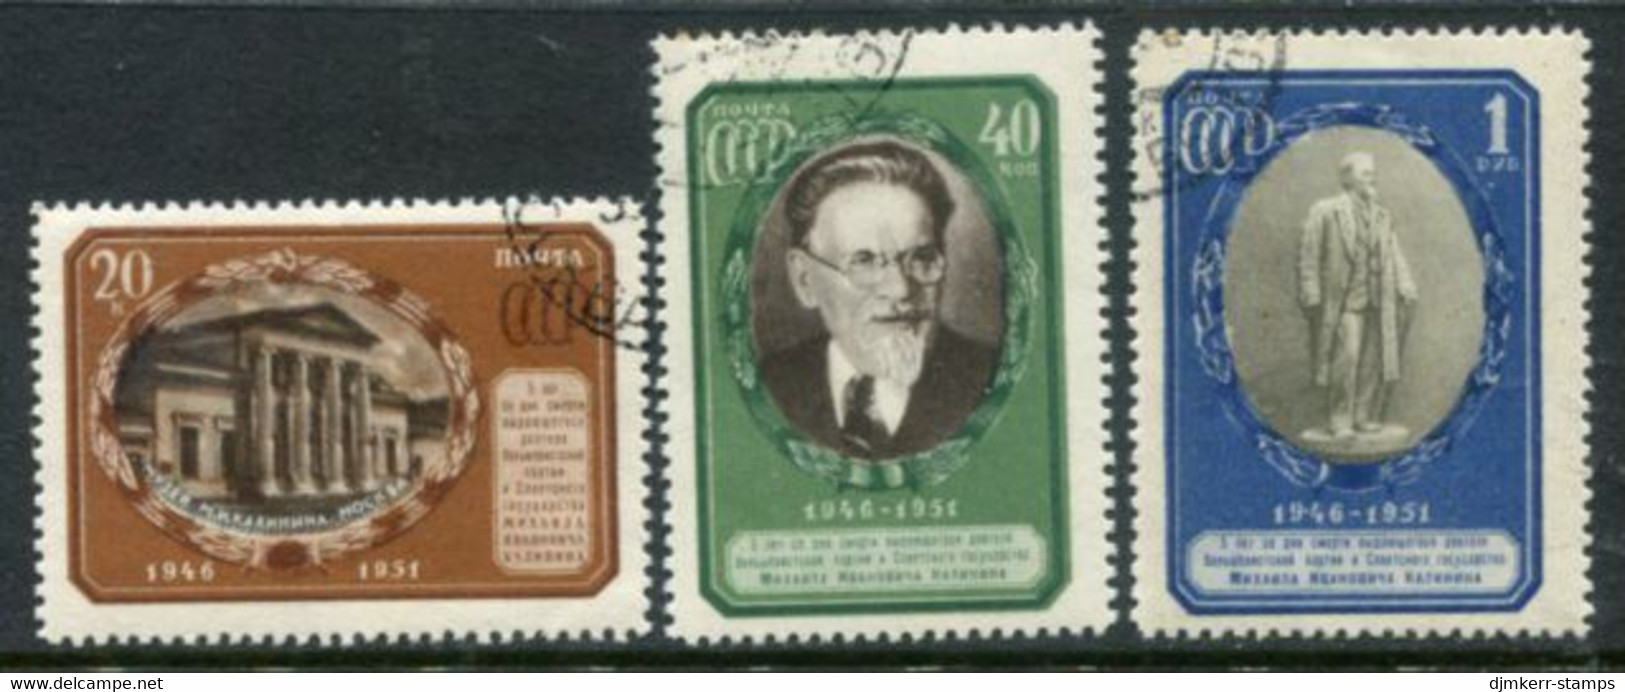 SOVIET UNION 1951 Kalinin Death Anniversary Type II (re-drawn Inscriptions) Used.  SG 1702a-04a; Michel 1570-72 - Used Stamps